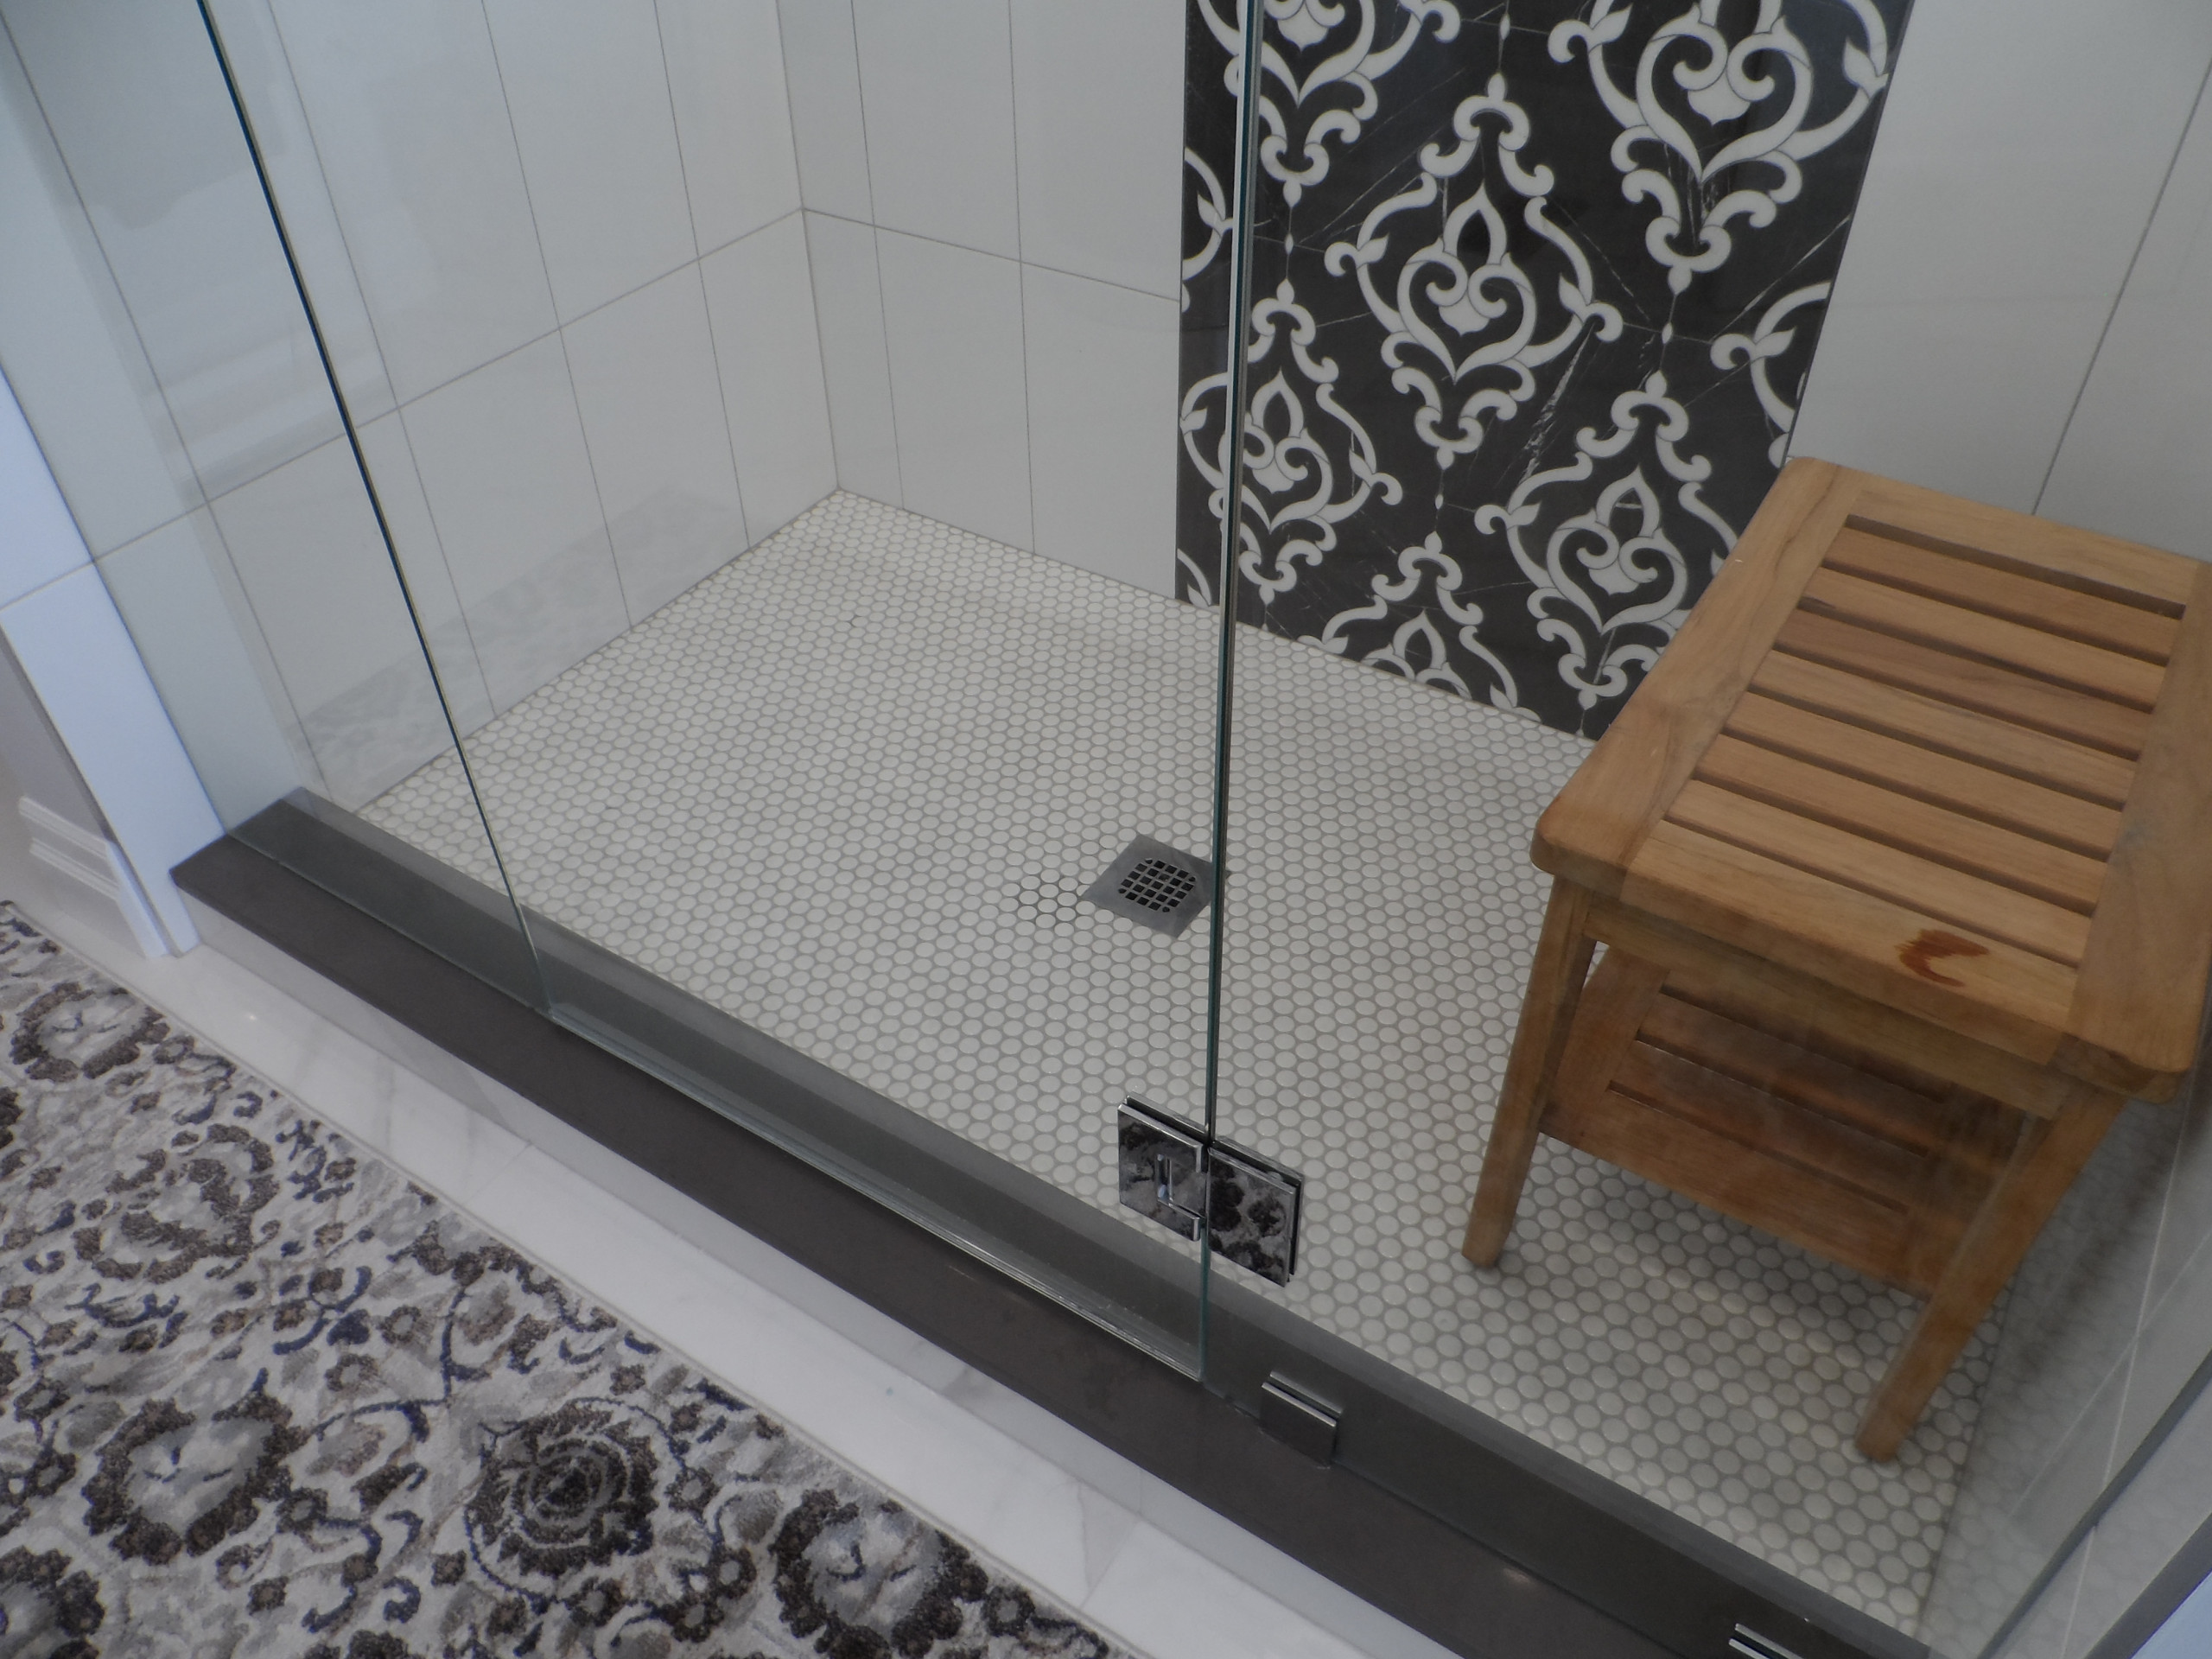 Master Bathroom with stunning shower accent tile